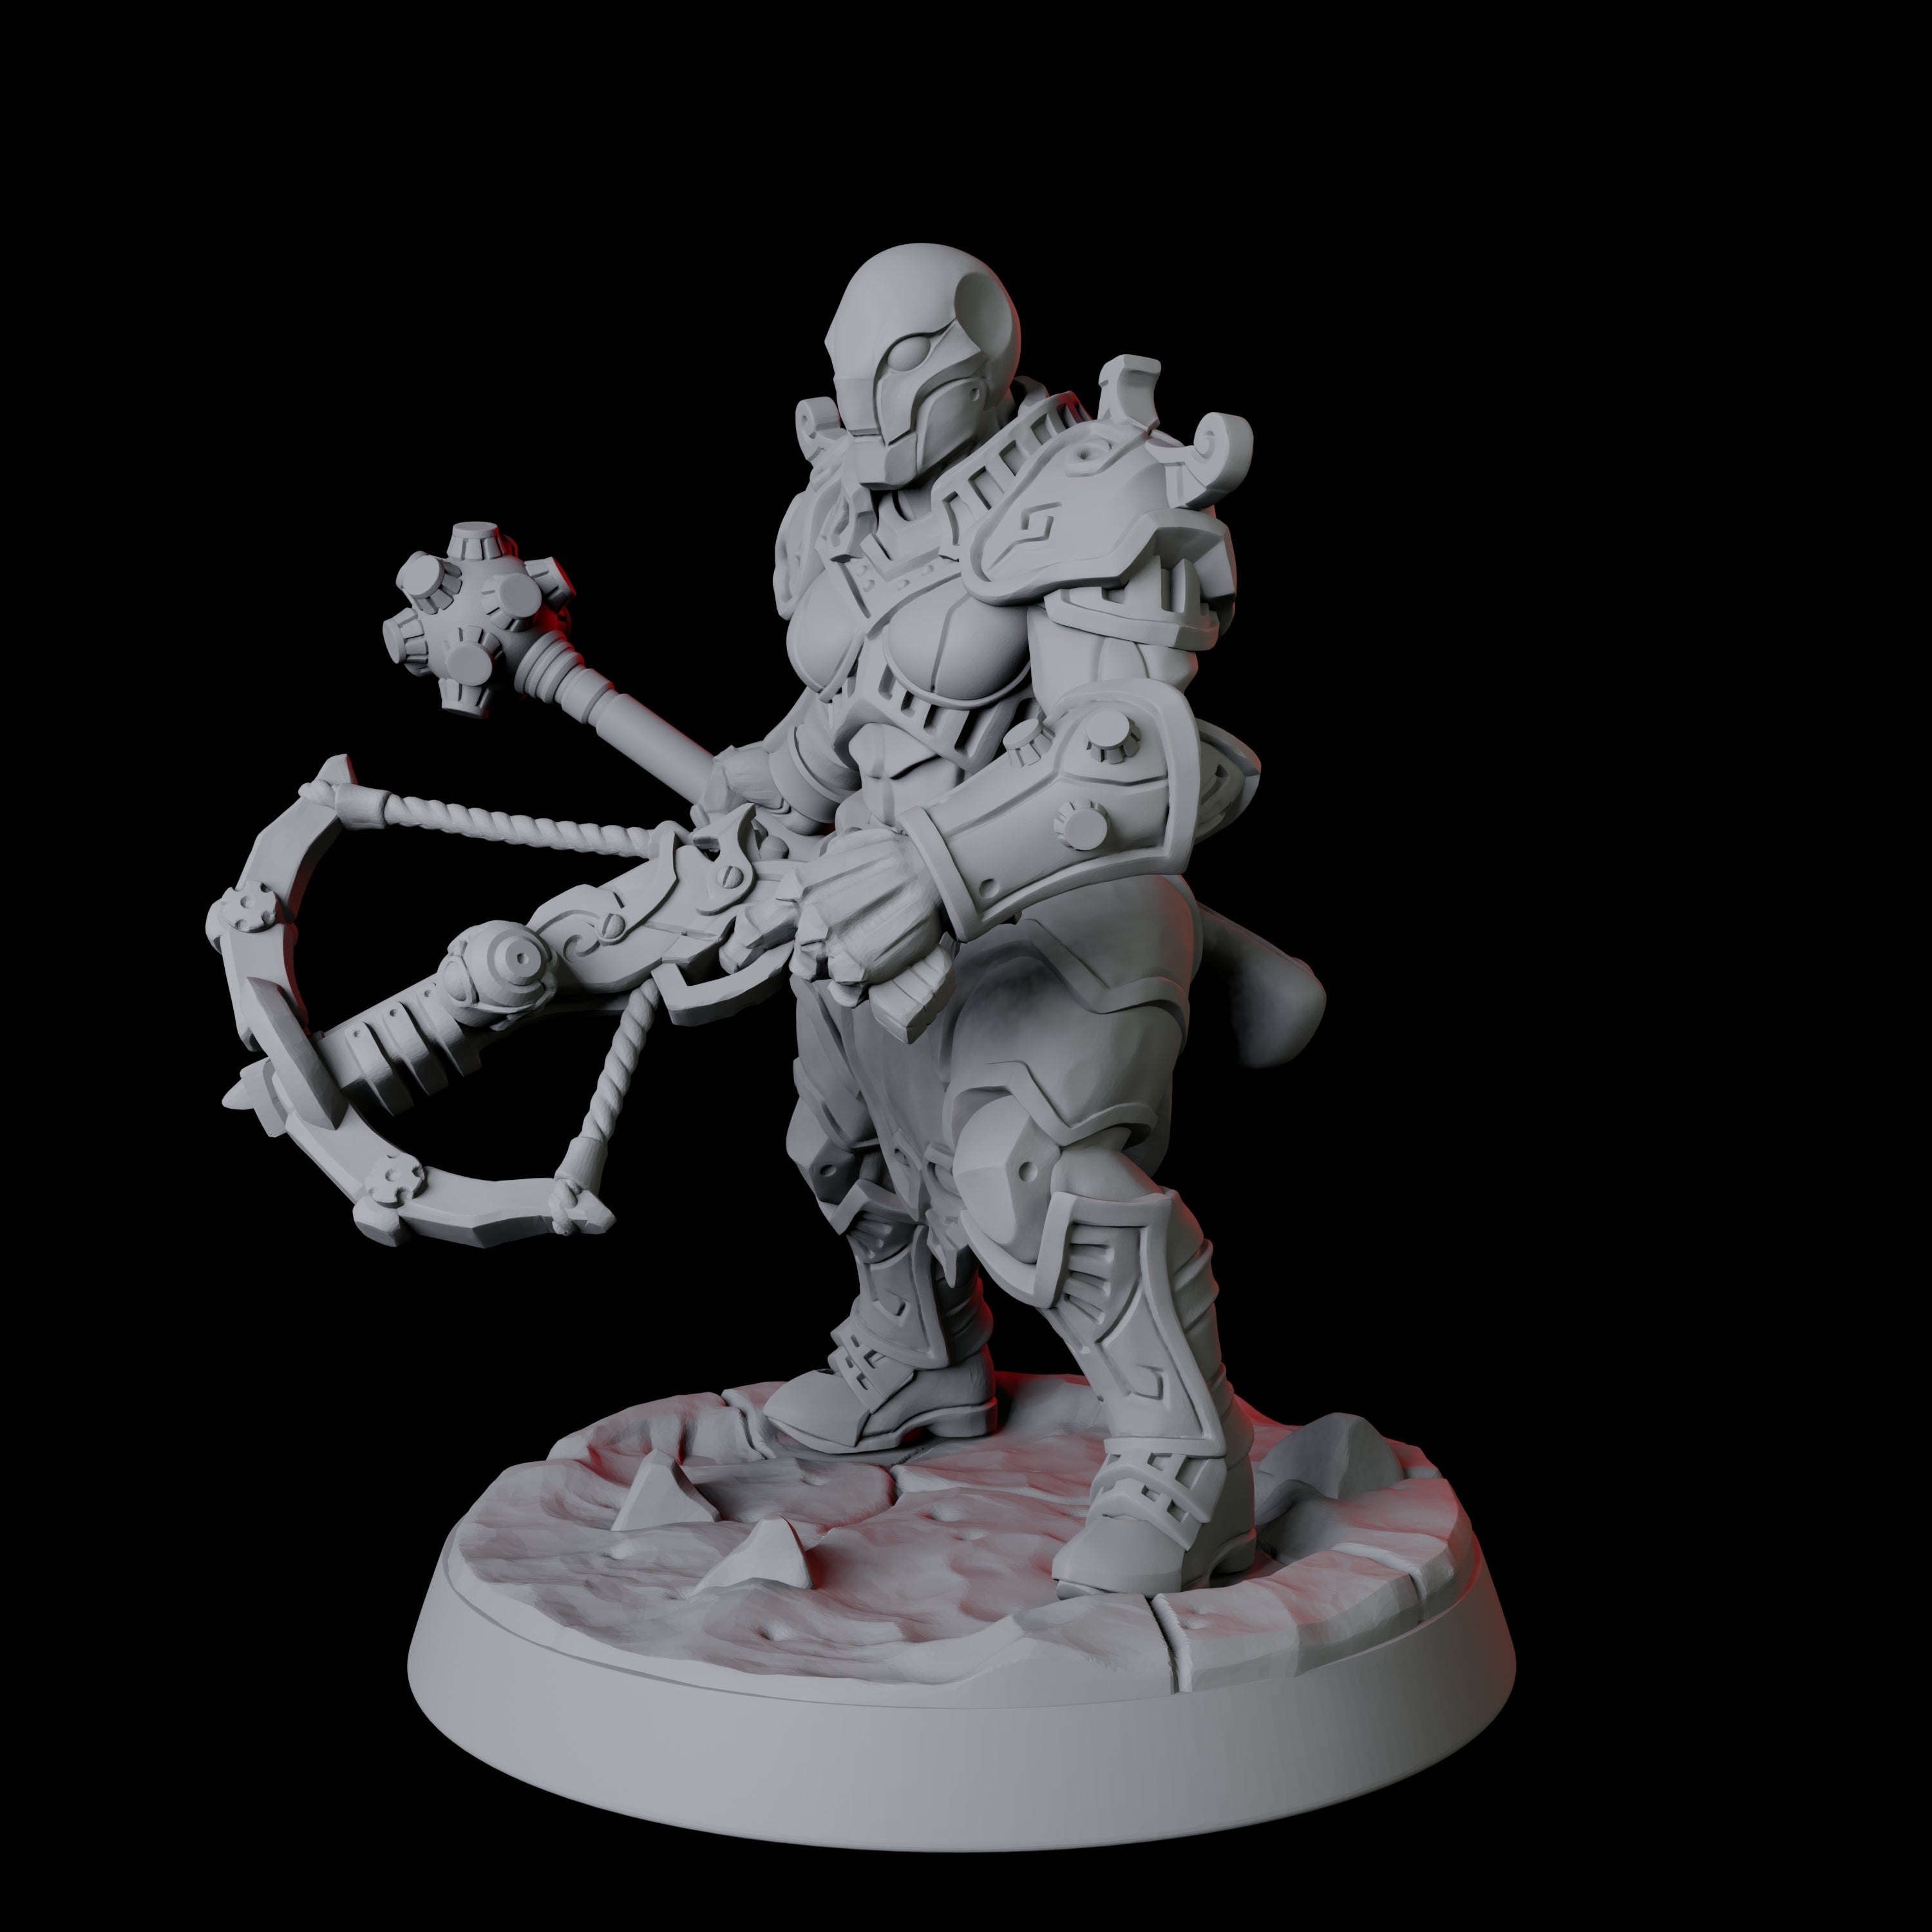 Battle-Ready Warforged D Miniature for Dungeons and Dragons, Pathfinder or other TTRPGs